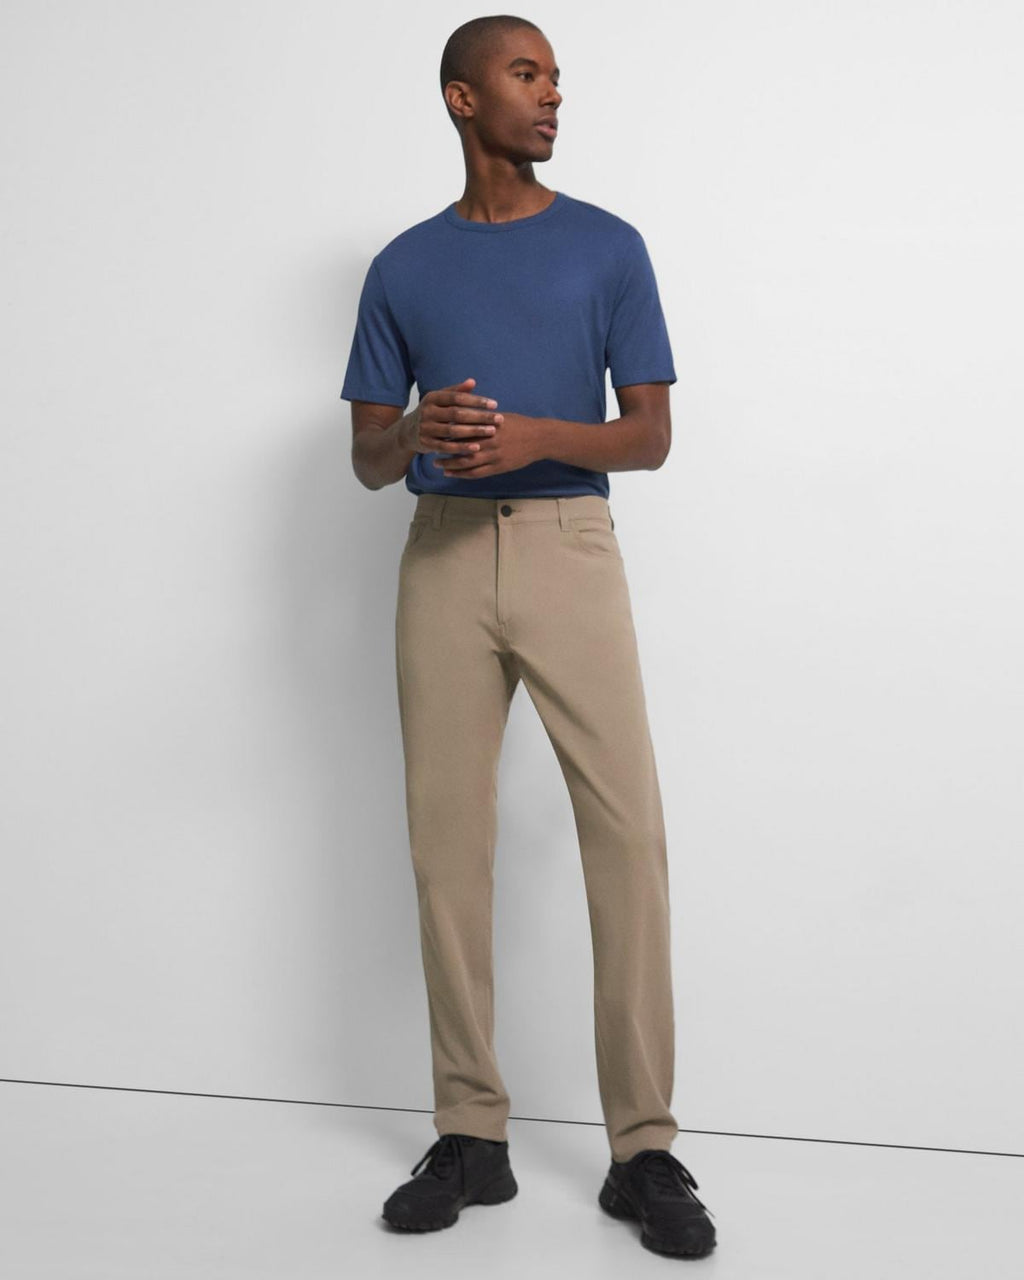 Theory Raffi 5-Pocket Pant in Neoteric Twill - Bark